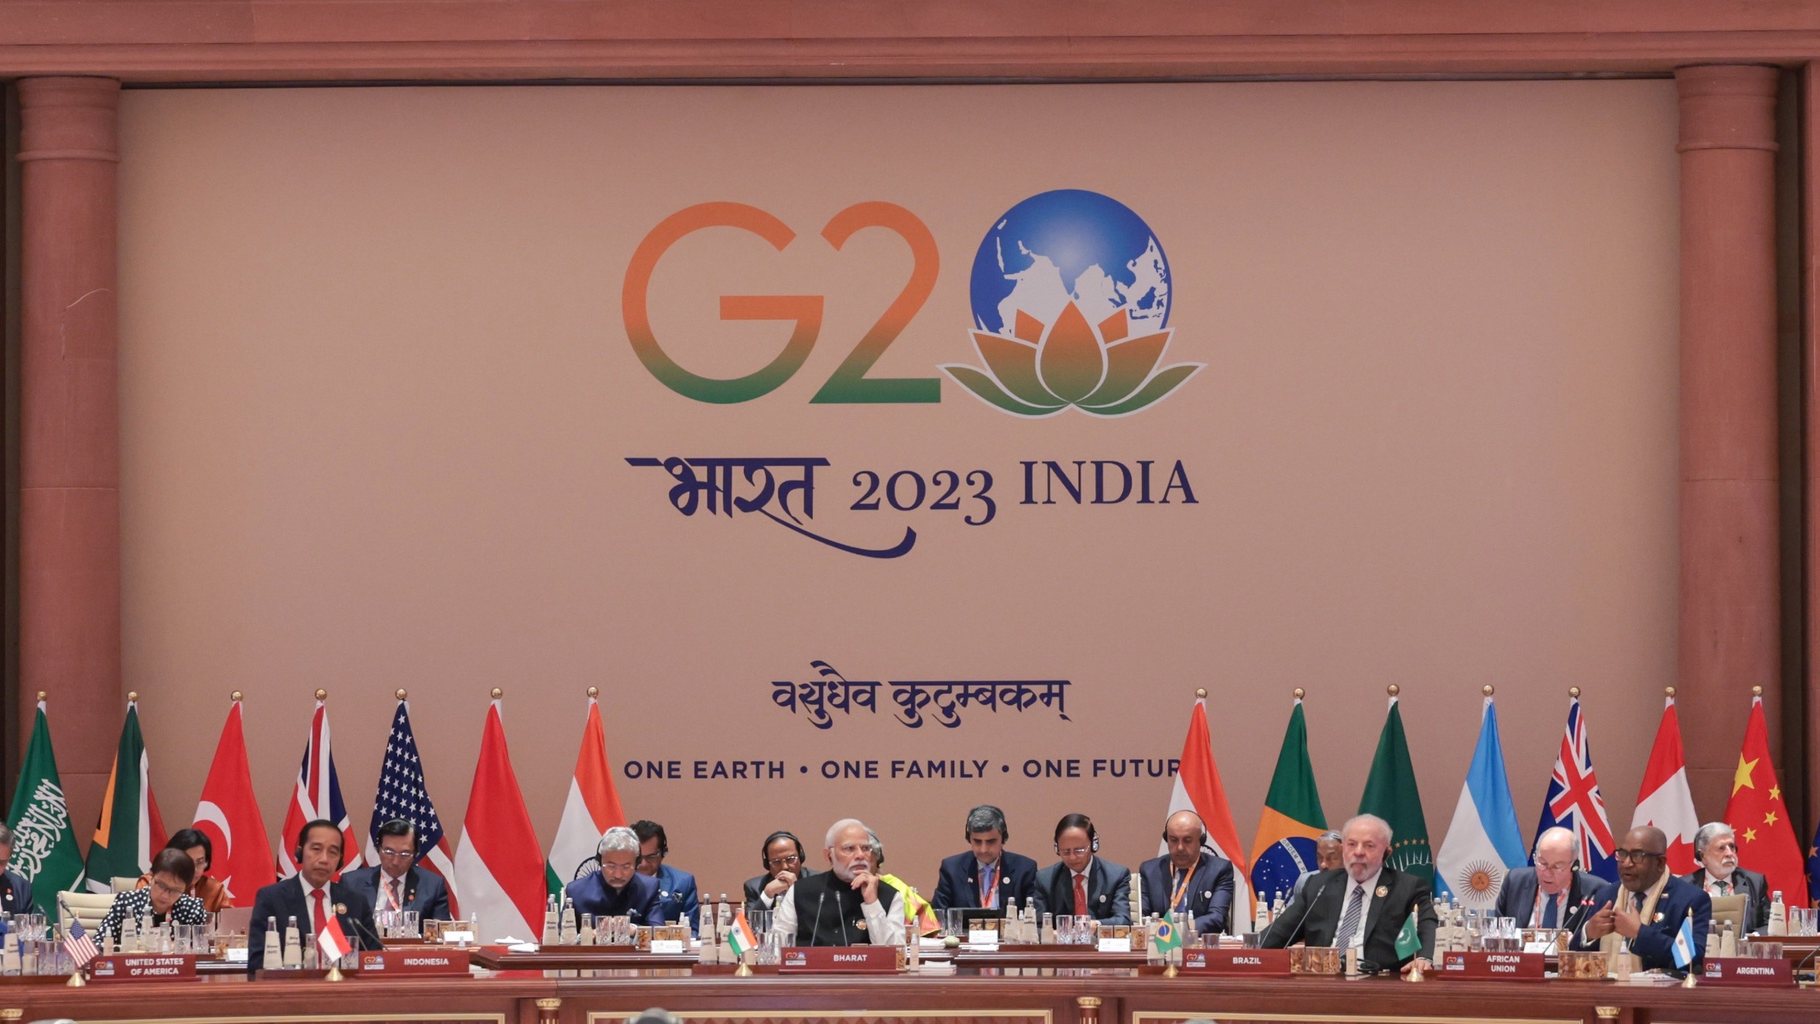 epa10852060 A handout photo made available by the Indian Press Information Bureau (PIB) shows a general view of world leaders attending the closing session of the G20 Summit at the ITPO Convention Centre Pragati Maidan in New Delhi, India, 10 September 2023. The G20 Heads of State and Government summit took place in the Indian capital on 09 and 10 September, where the participants earlier paid tribute at the Mahatama Gandhi memorial on the second and last day of the summit.  EPA/INDIA PRESS INFORMATION BUREAU  HANDOUT EDITORIAL USE ONLY/NO SALES